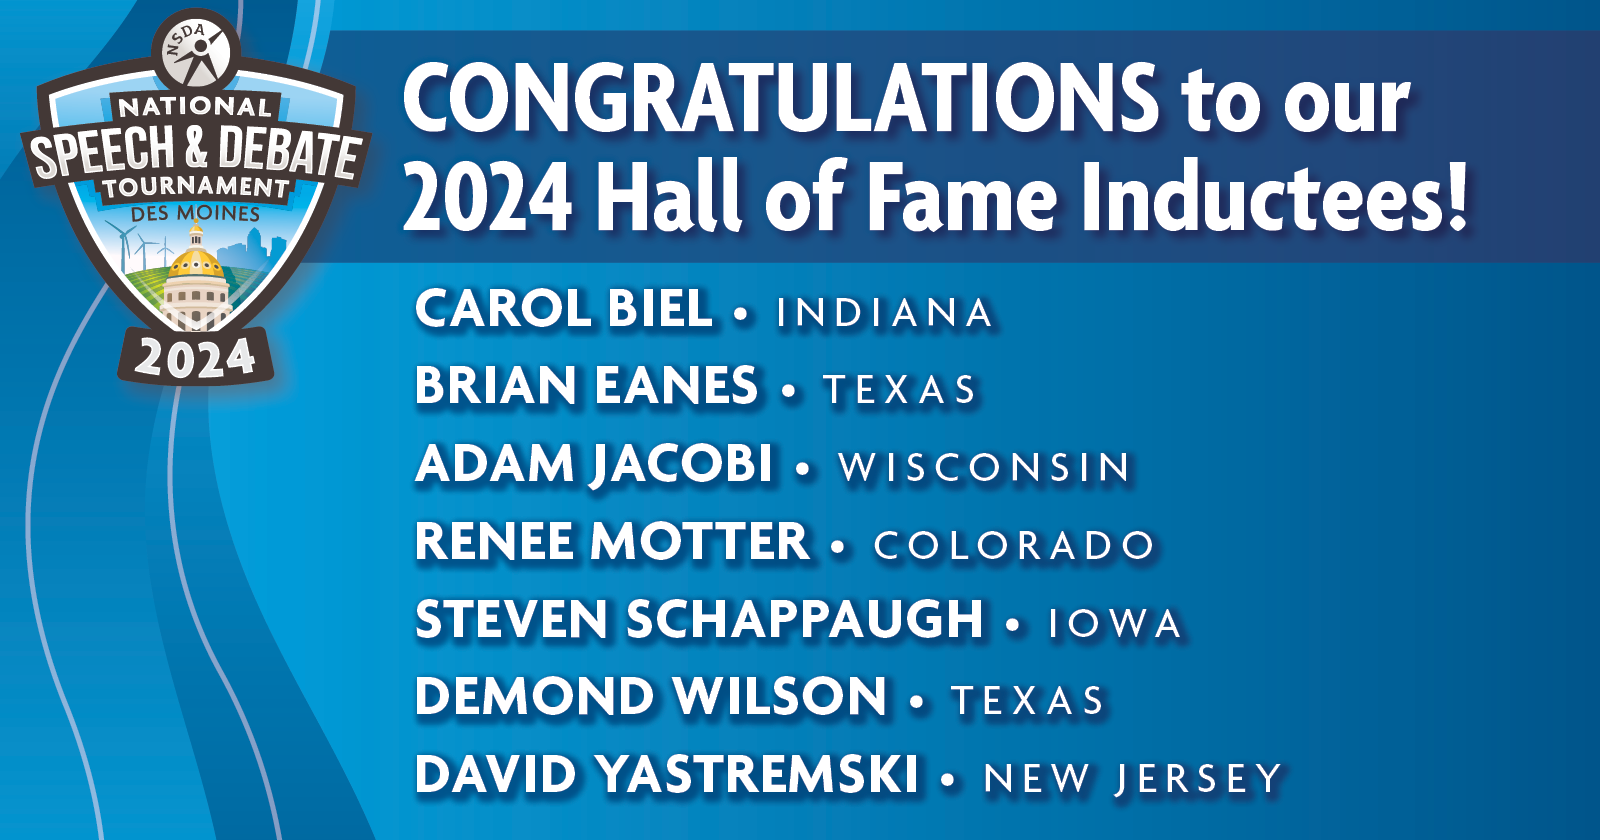 Congratulations to our 2024 Hall of Fame Inductees!